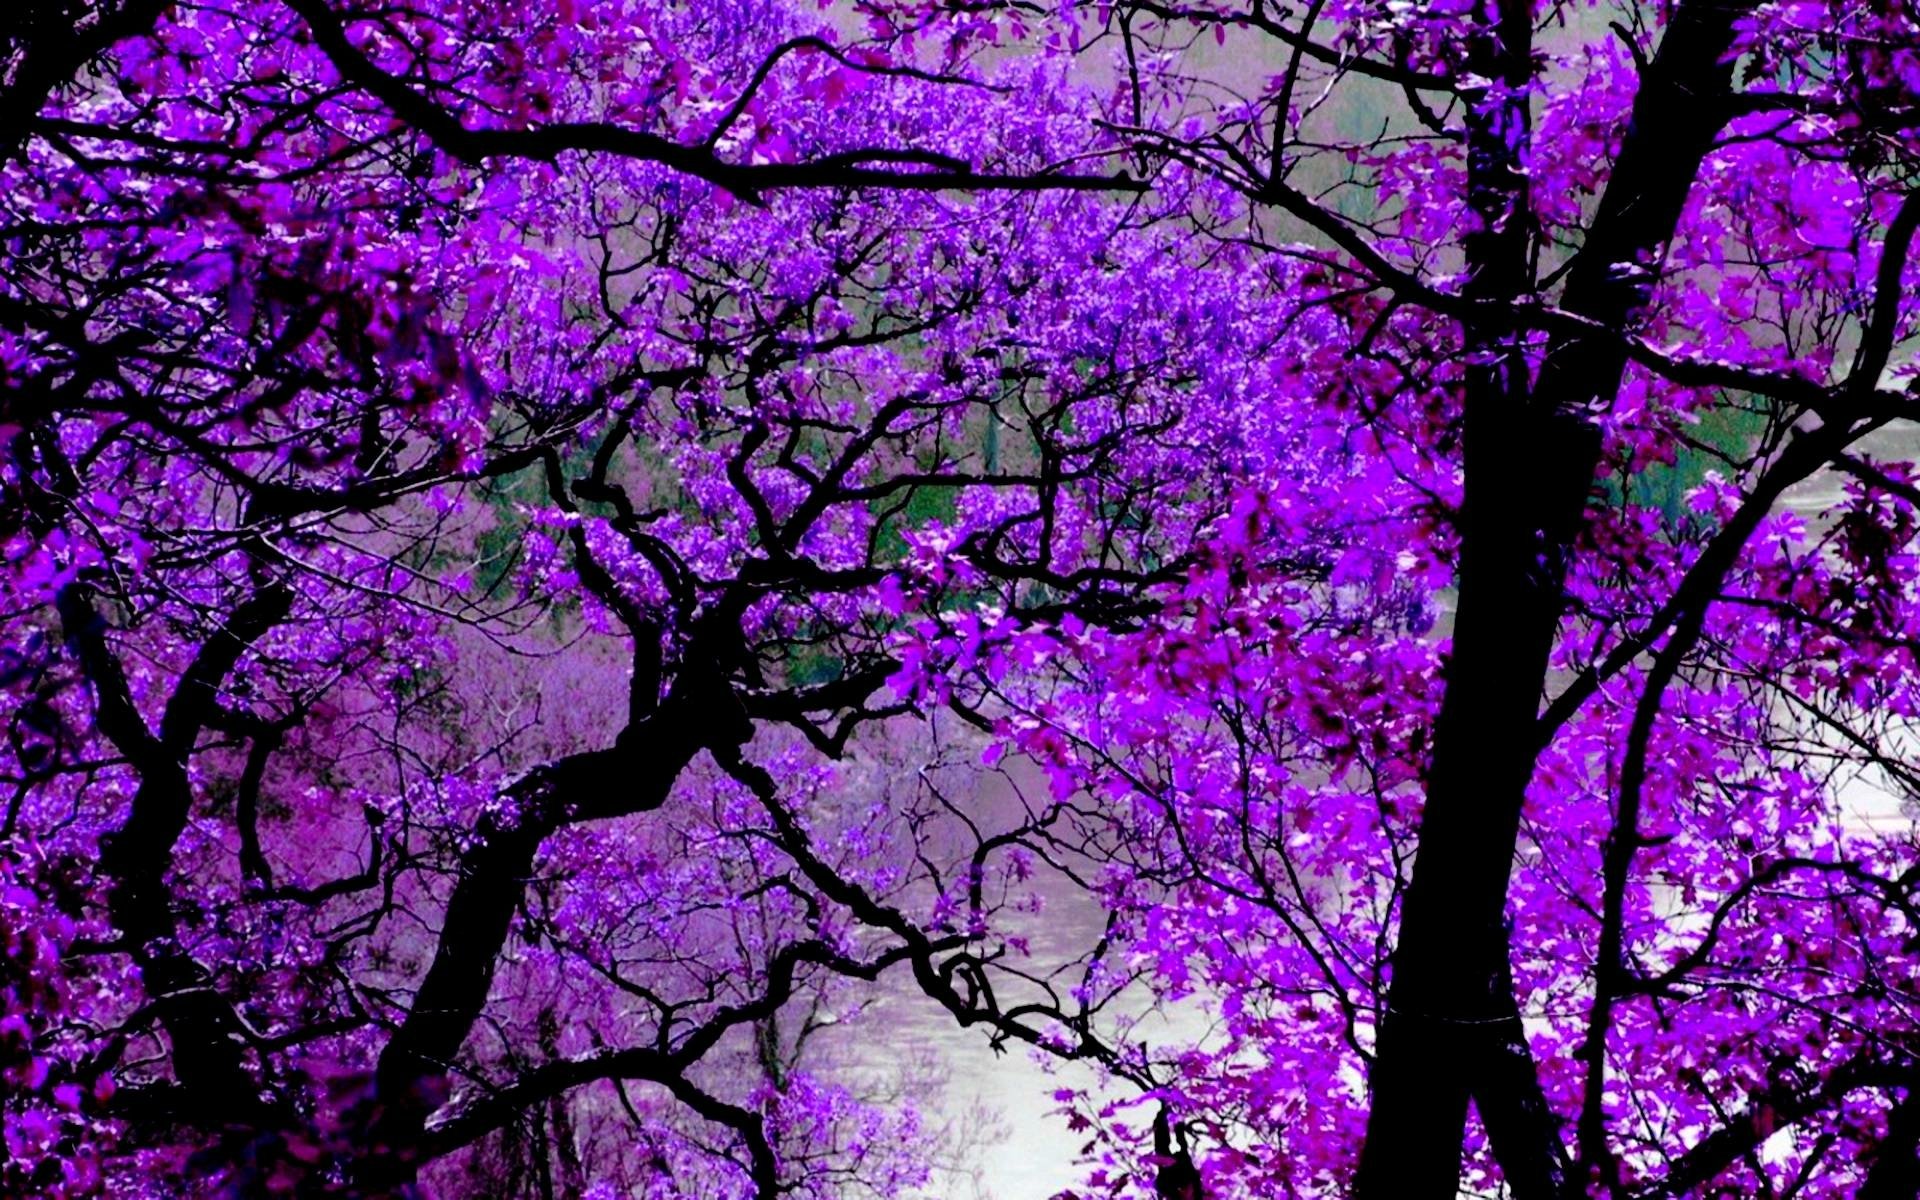  Purple  Blossoms Full HD Wallpaper and Background Image  